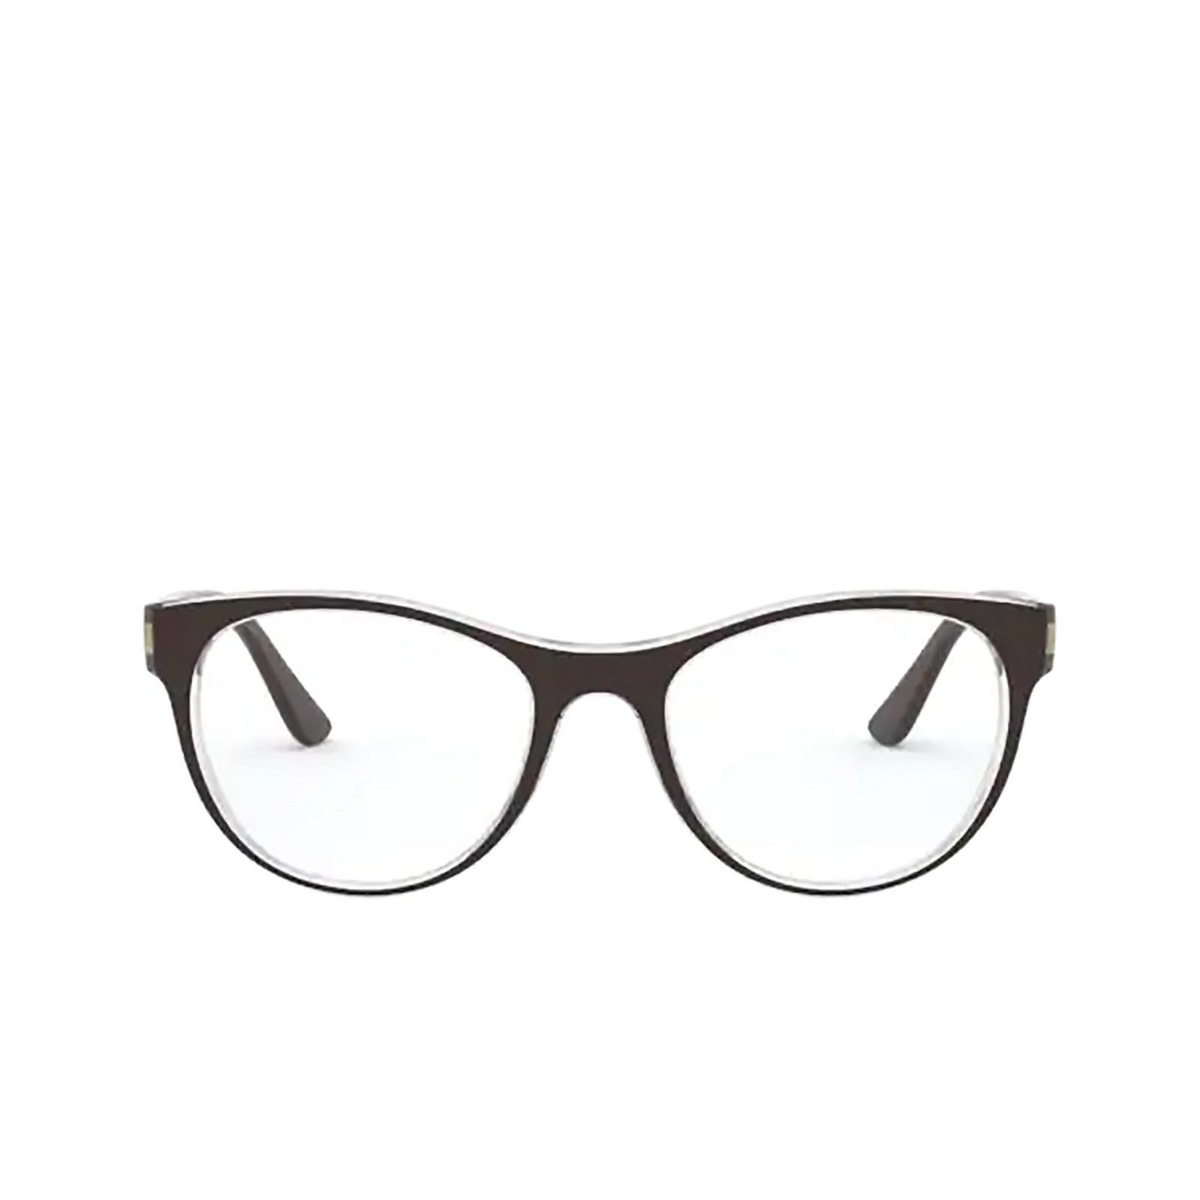 Vogue® Cat-eye Eyeglasses: VO5336 color 2842 Top Brown / Serigraphy - front view